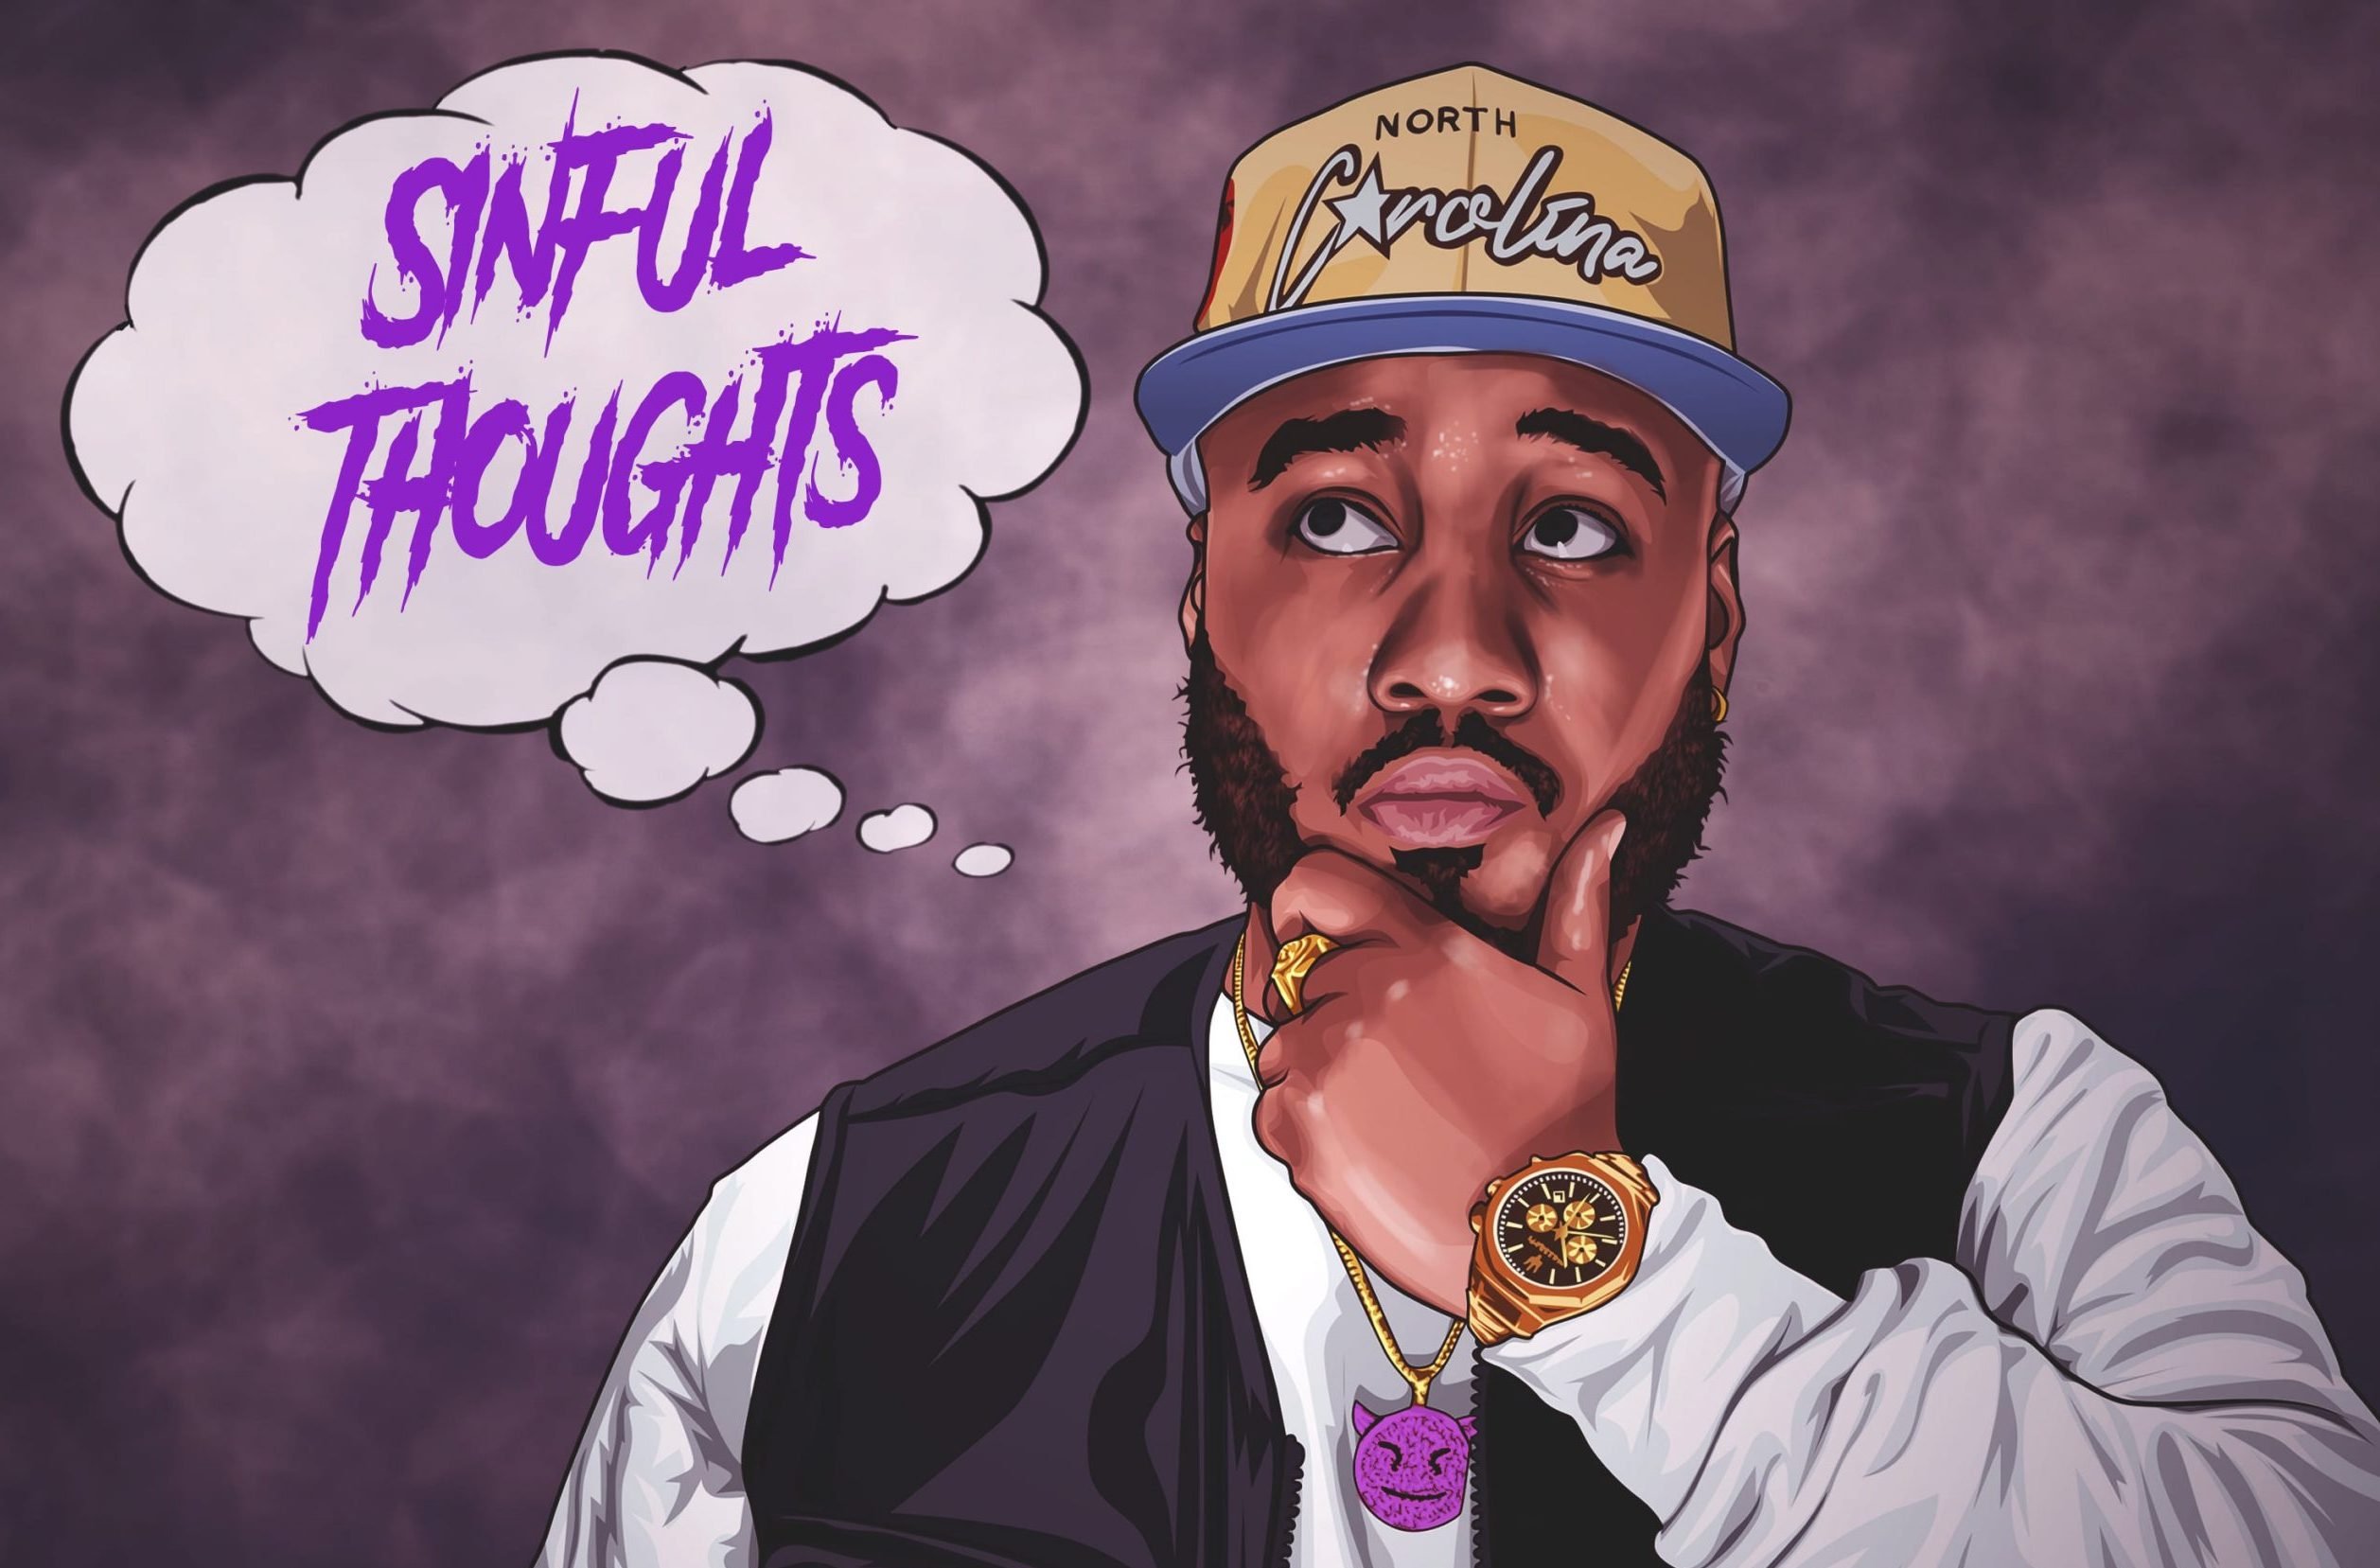 Sin-cere Releases his New Album "Sinful Thoughts"